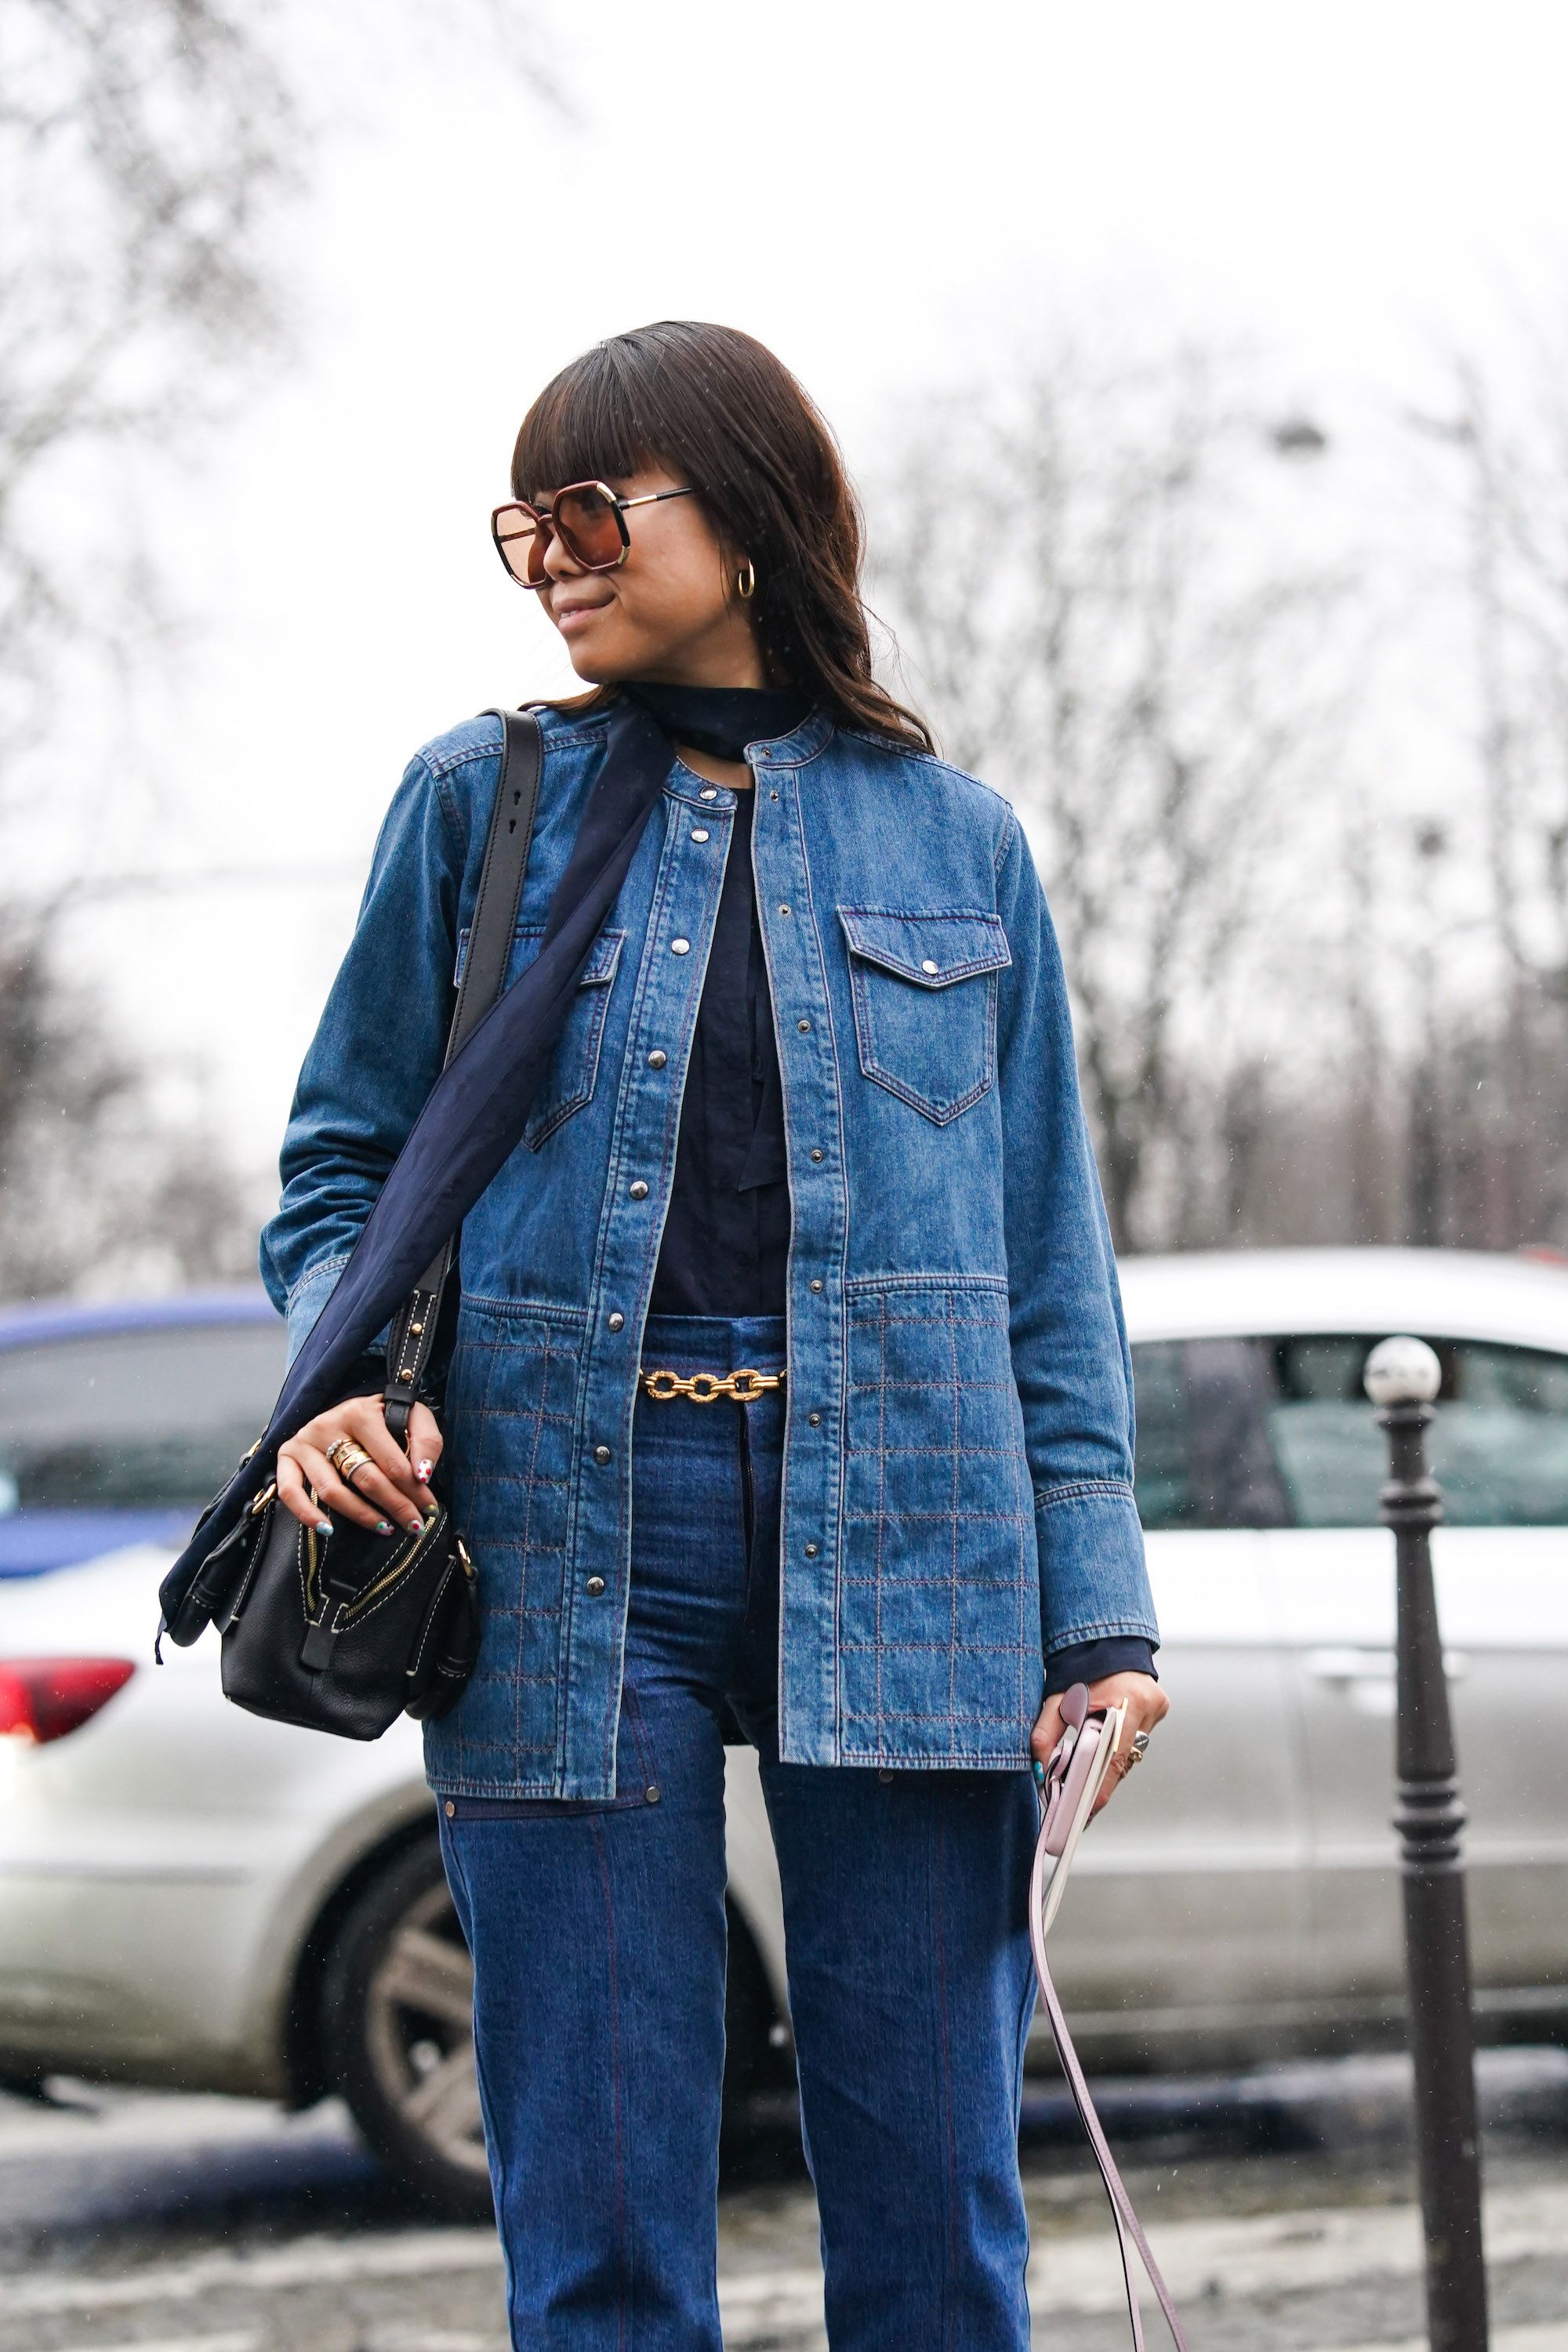 Jean Jacket Outfits: The Jean Jacket Outfits Celebrities Swear By | Glamour